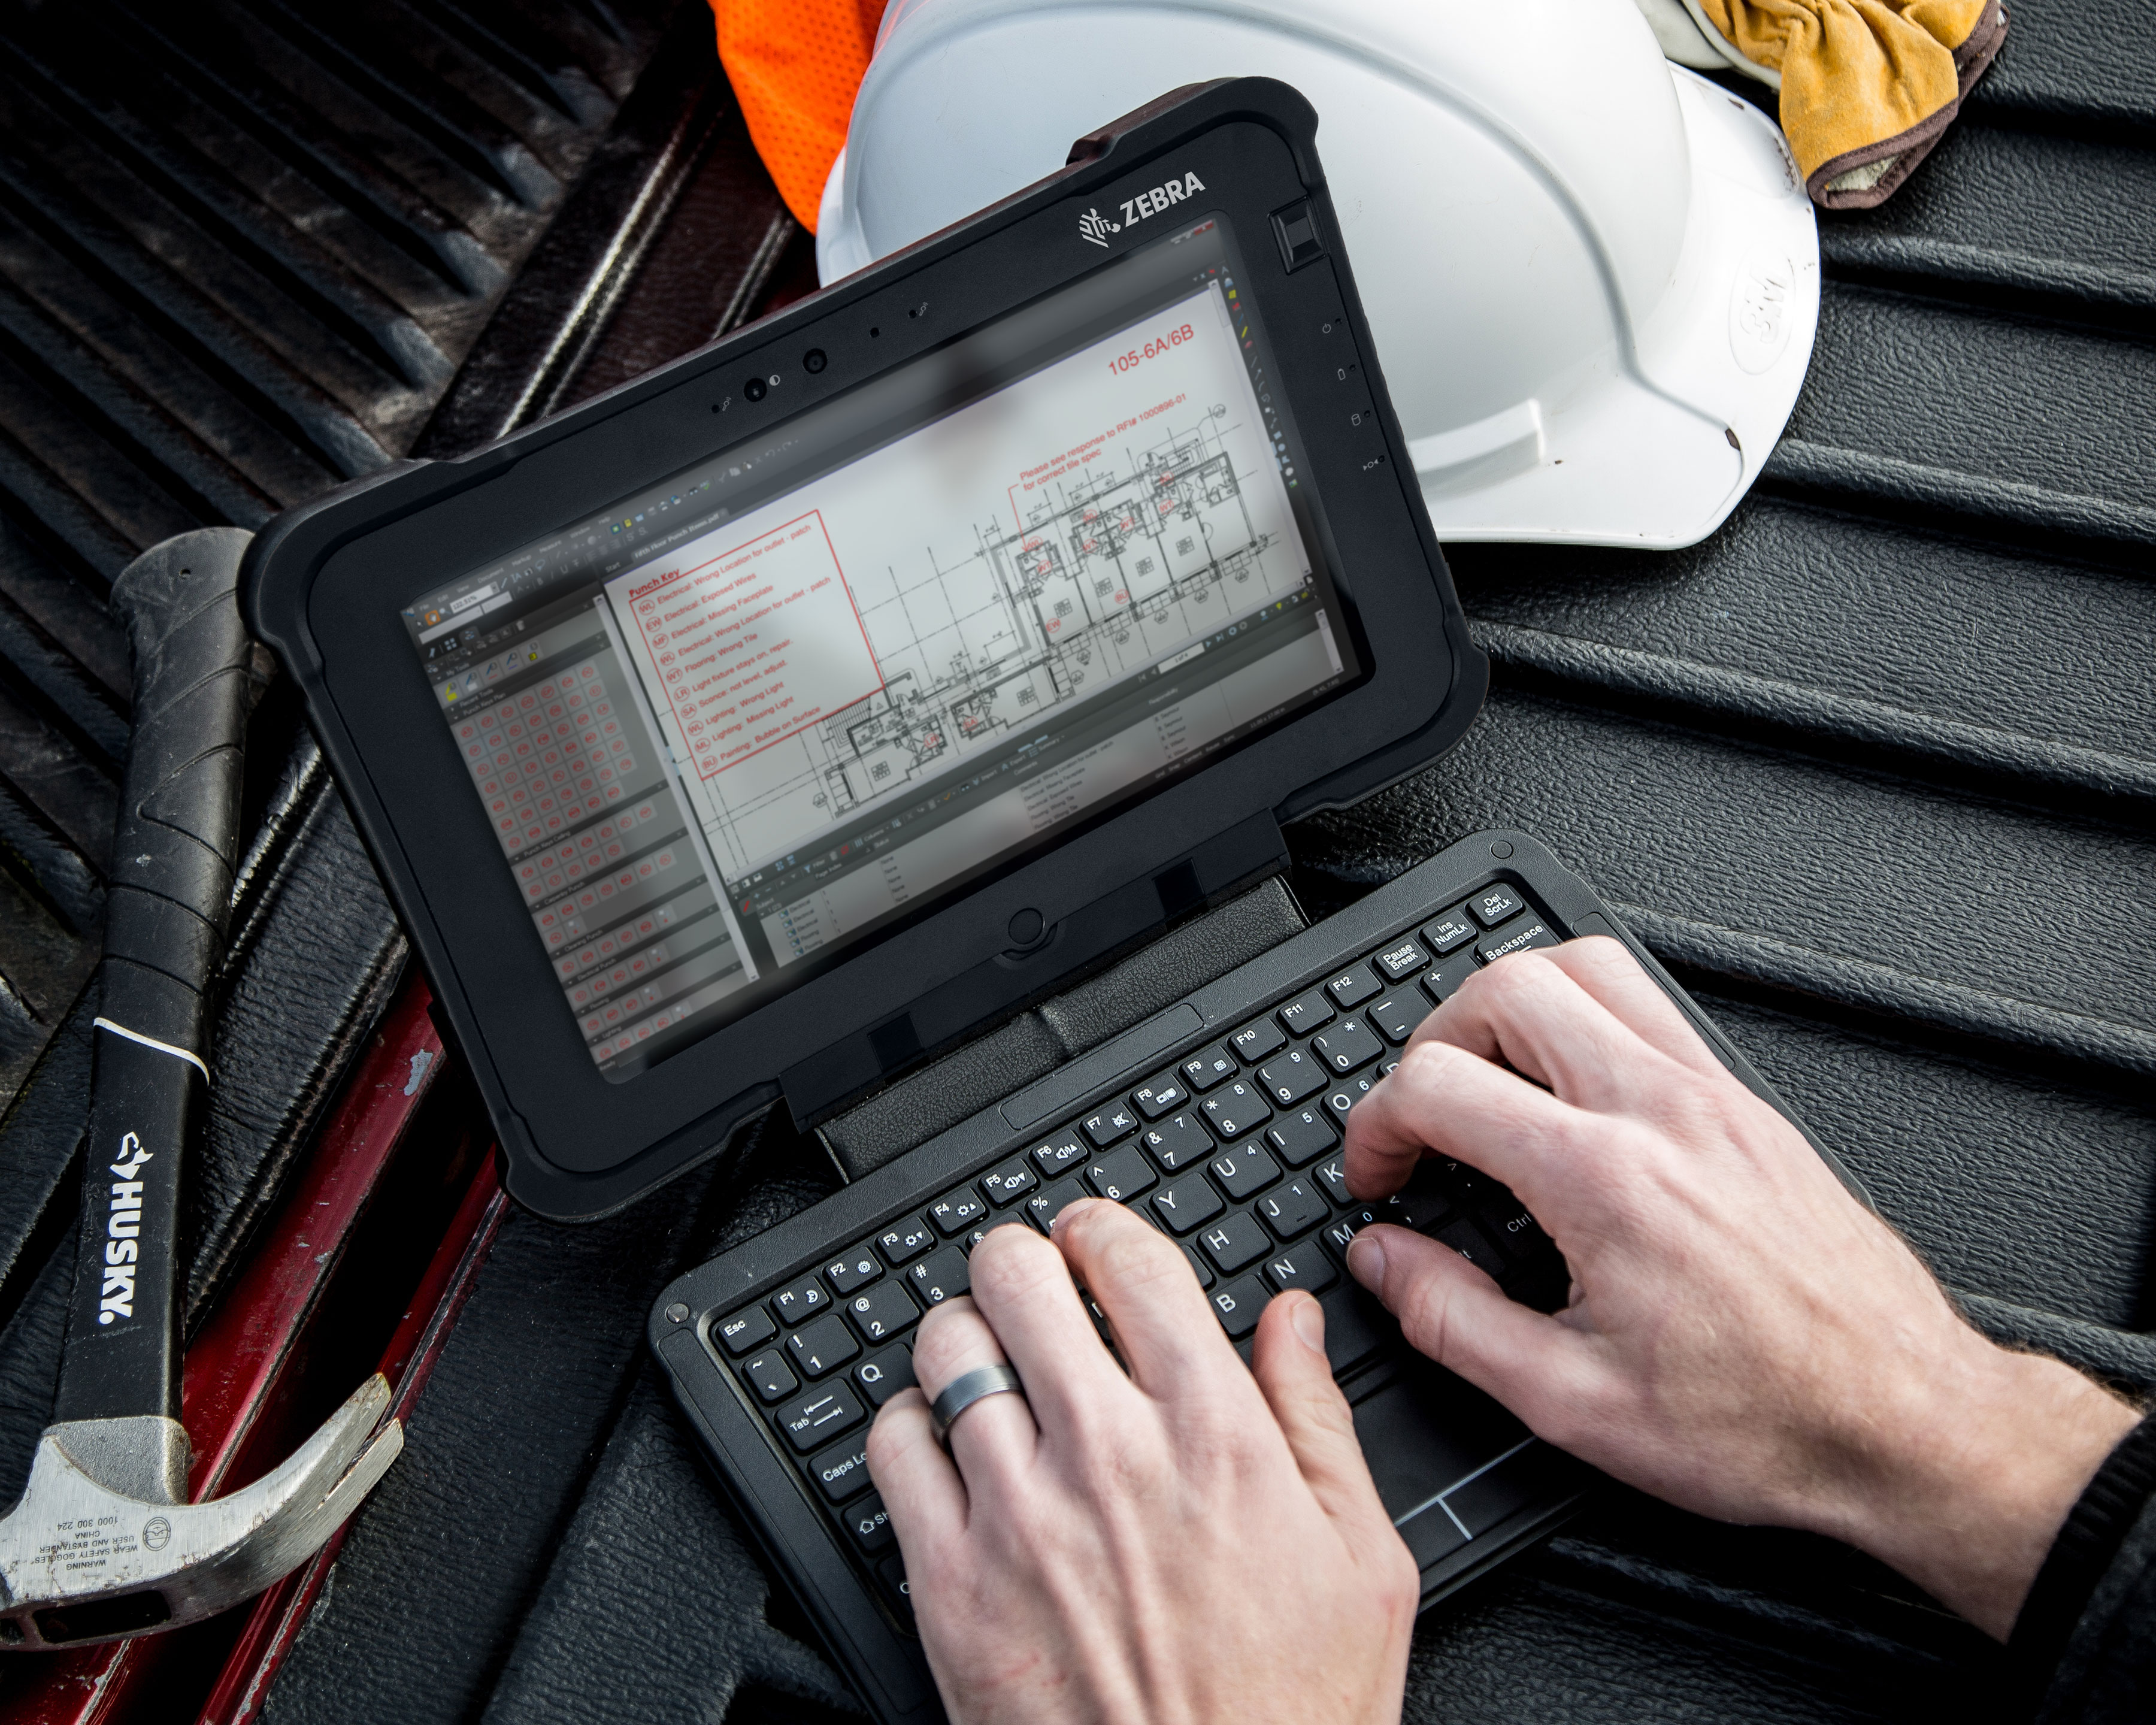 Construction worker uses a Zebra L10 rugged tablet to update a construction punch list on a truck bed